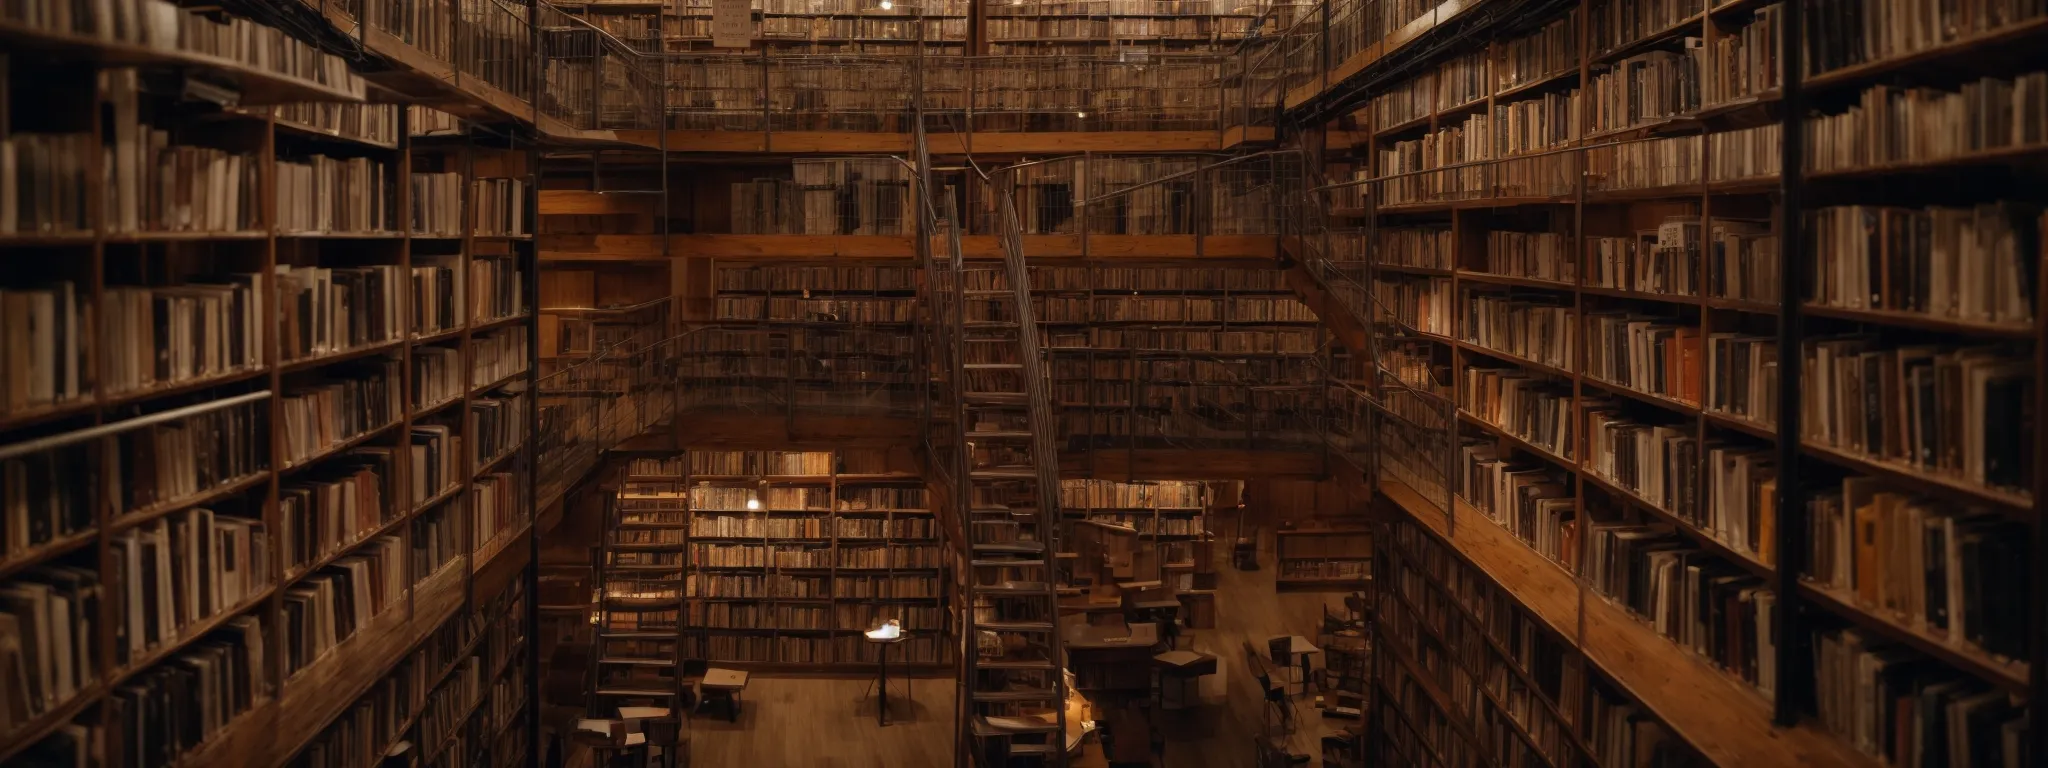 a vast library with overcrowded shelves sagging under the weight of too many books, some stacked carelessly on the floor.